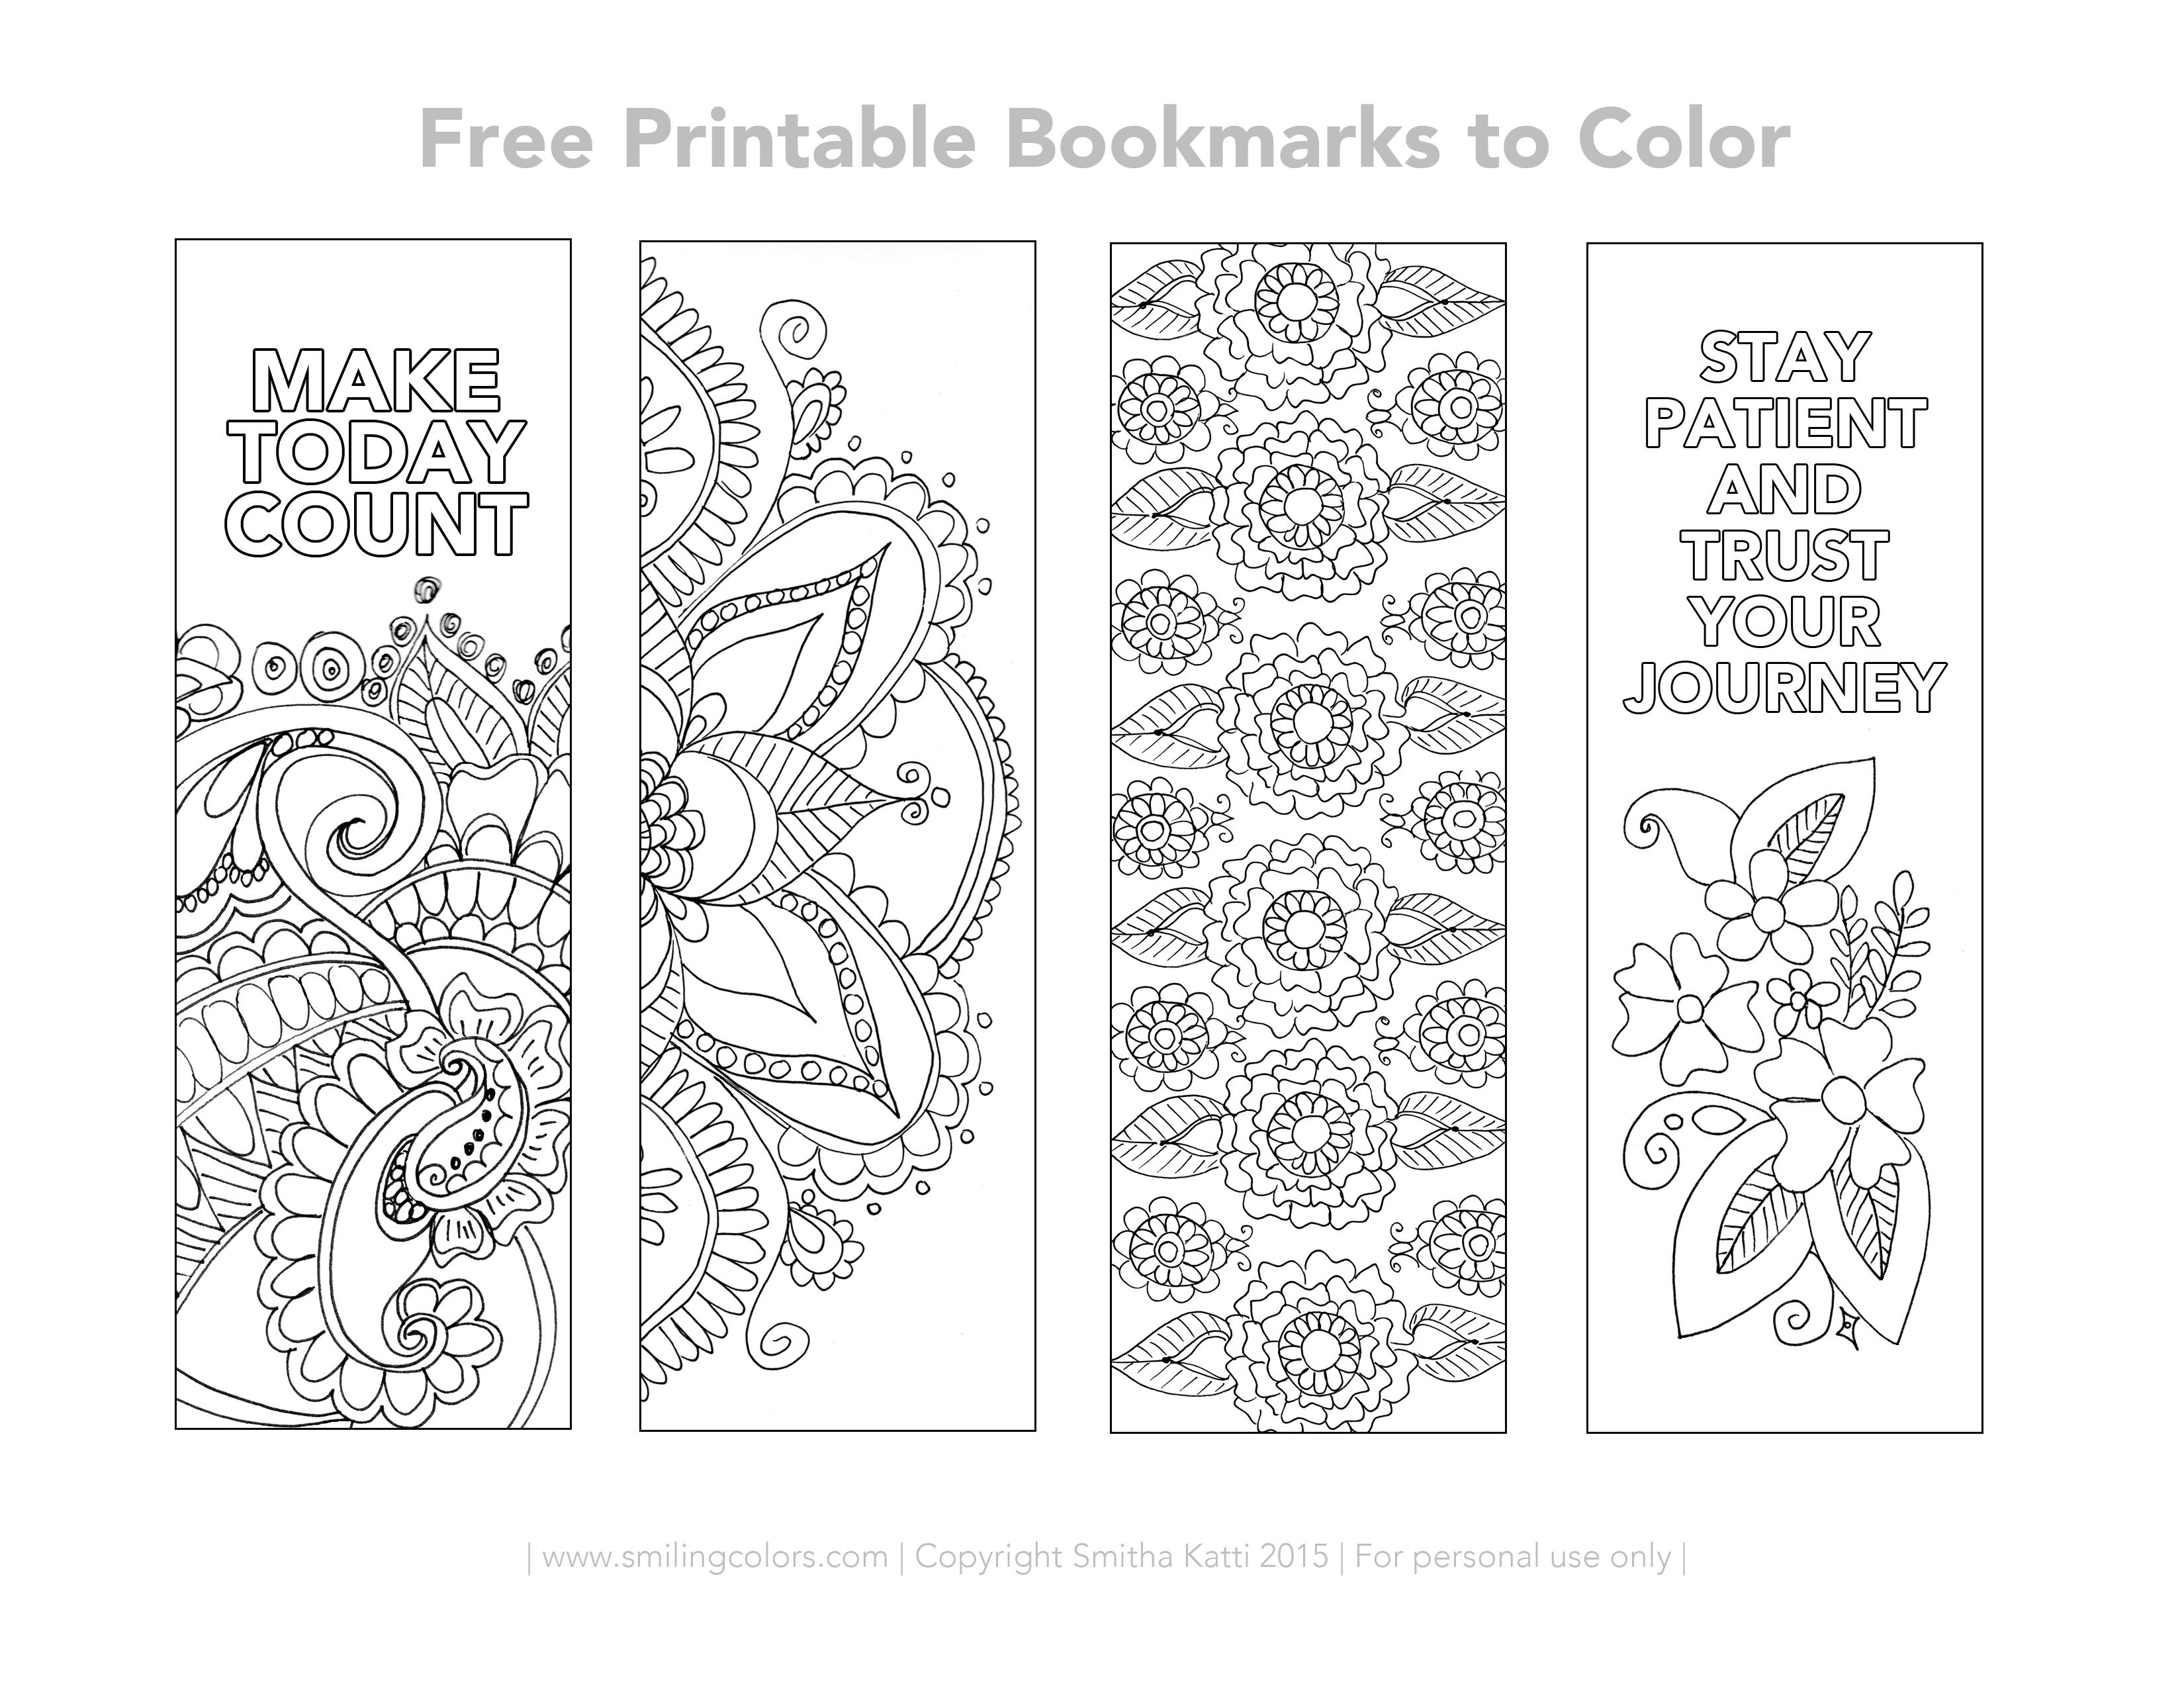 Free Printable Bookmarks To Color | Inspirational | Free Printable - Free Printable Spring Bookmarks